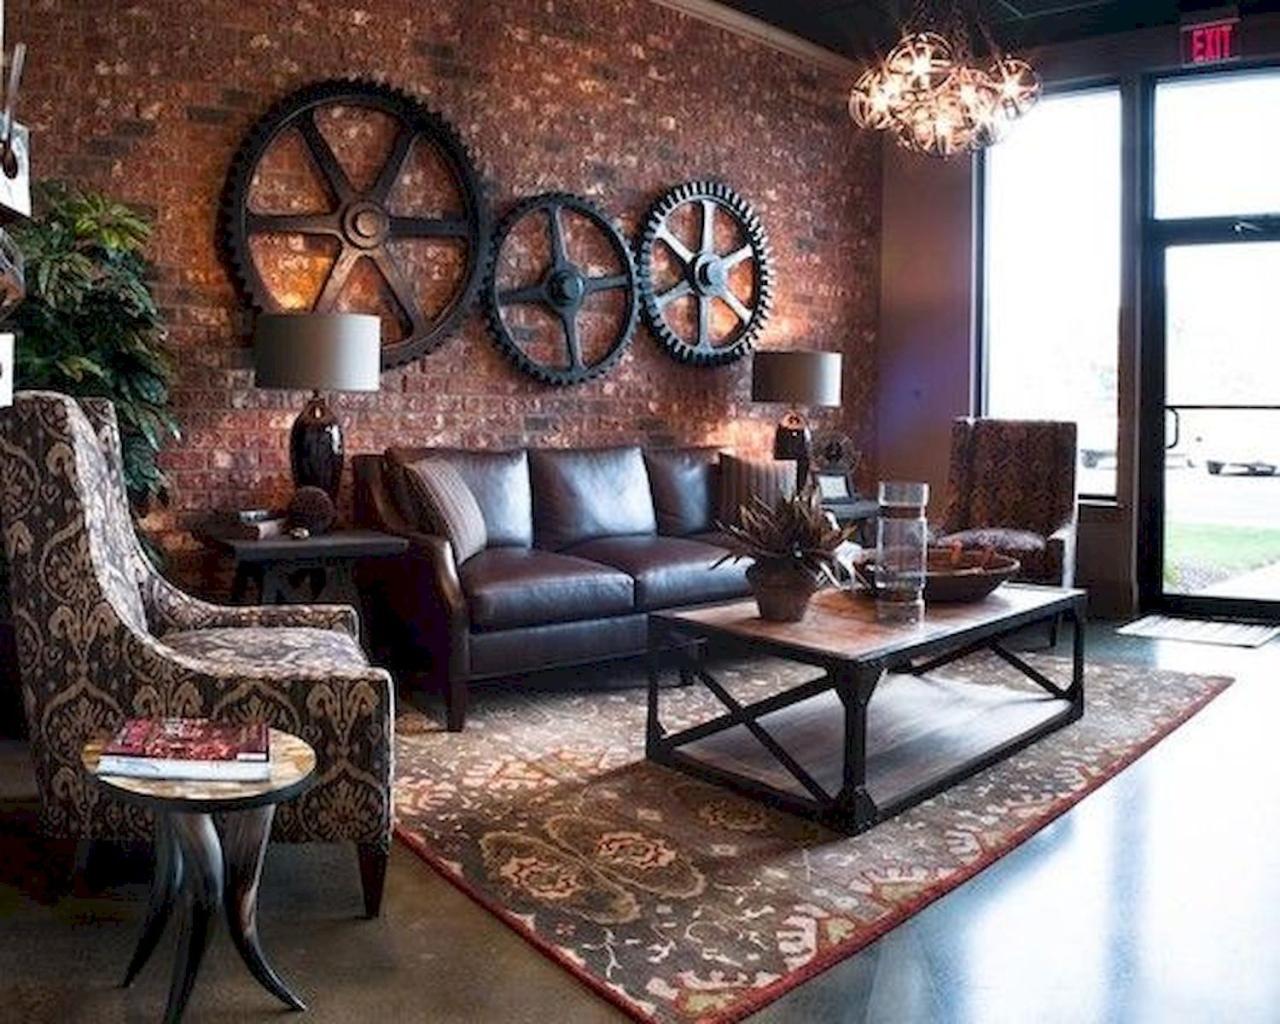 Vintage Industrial: Retro-Inspired Living Room Design Ideas with Modern Touches